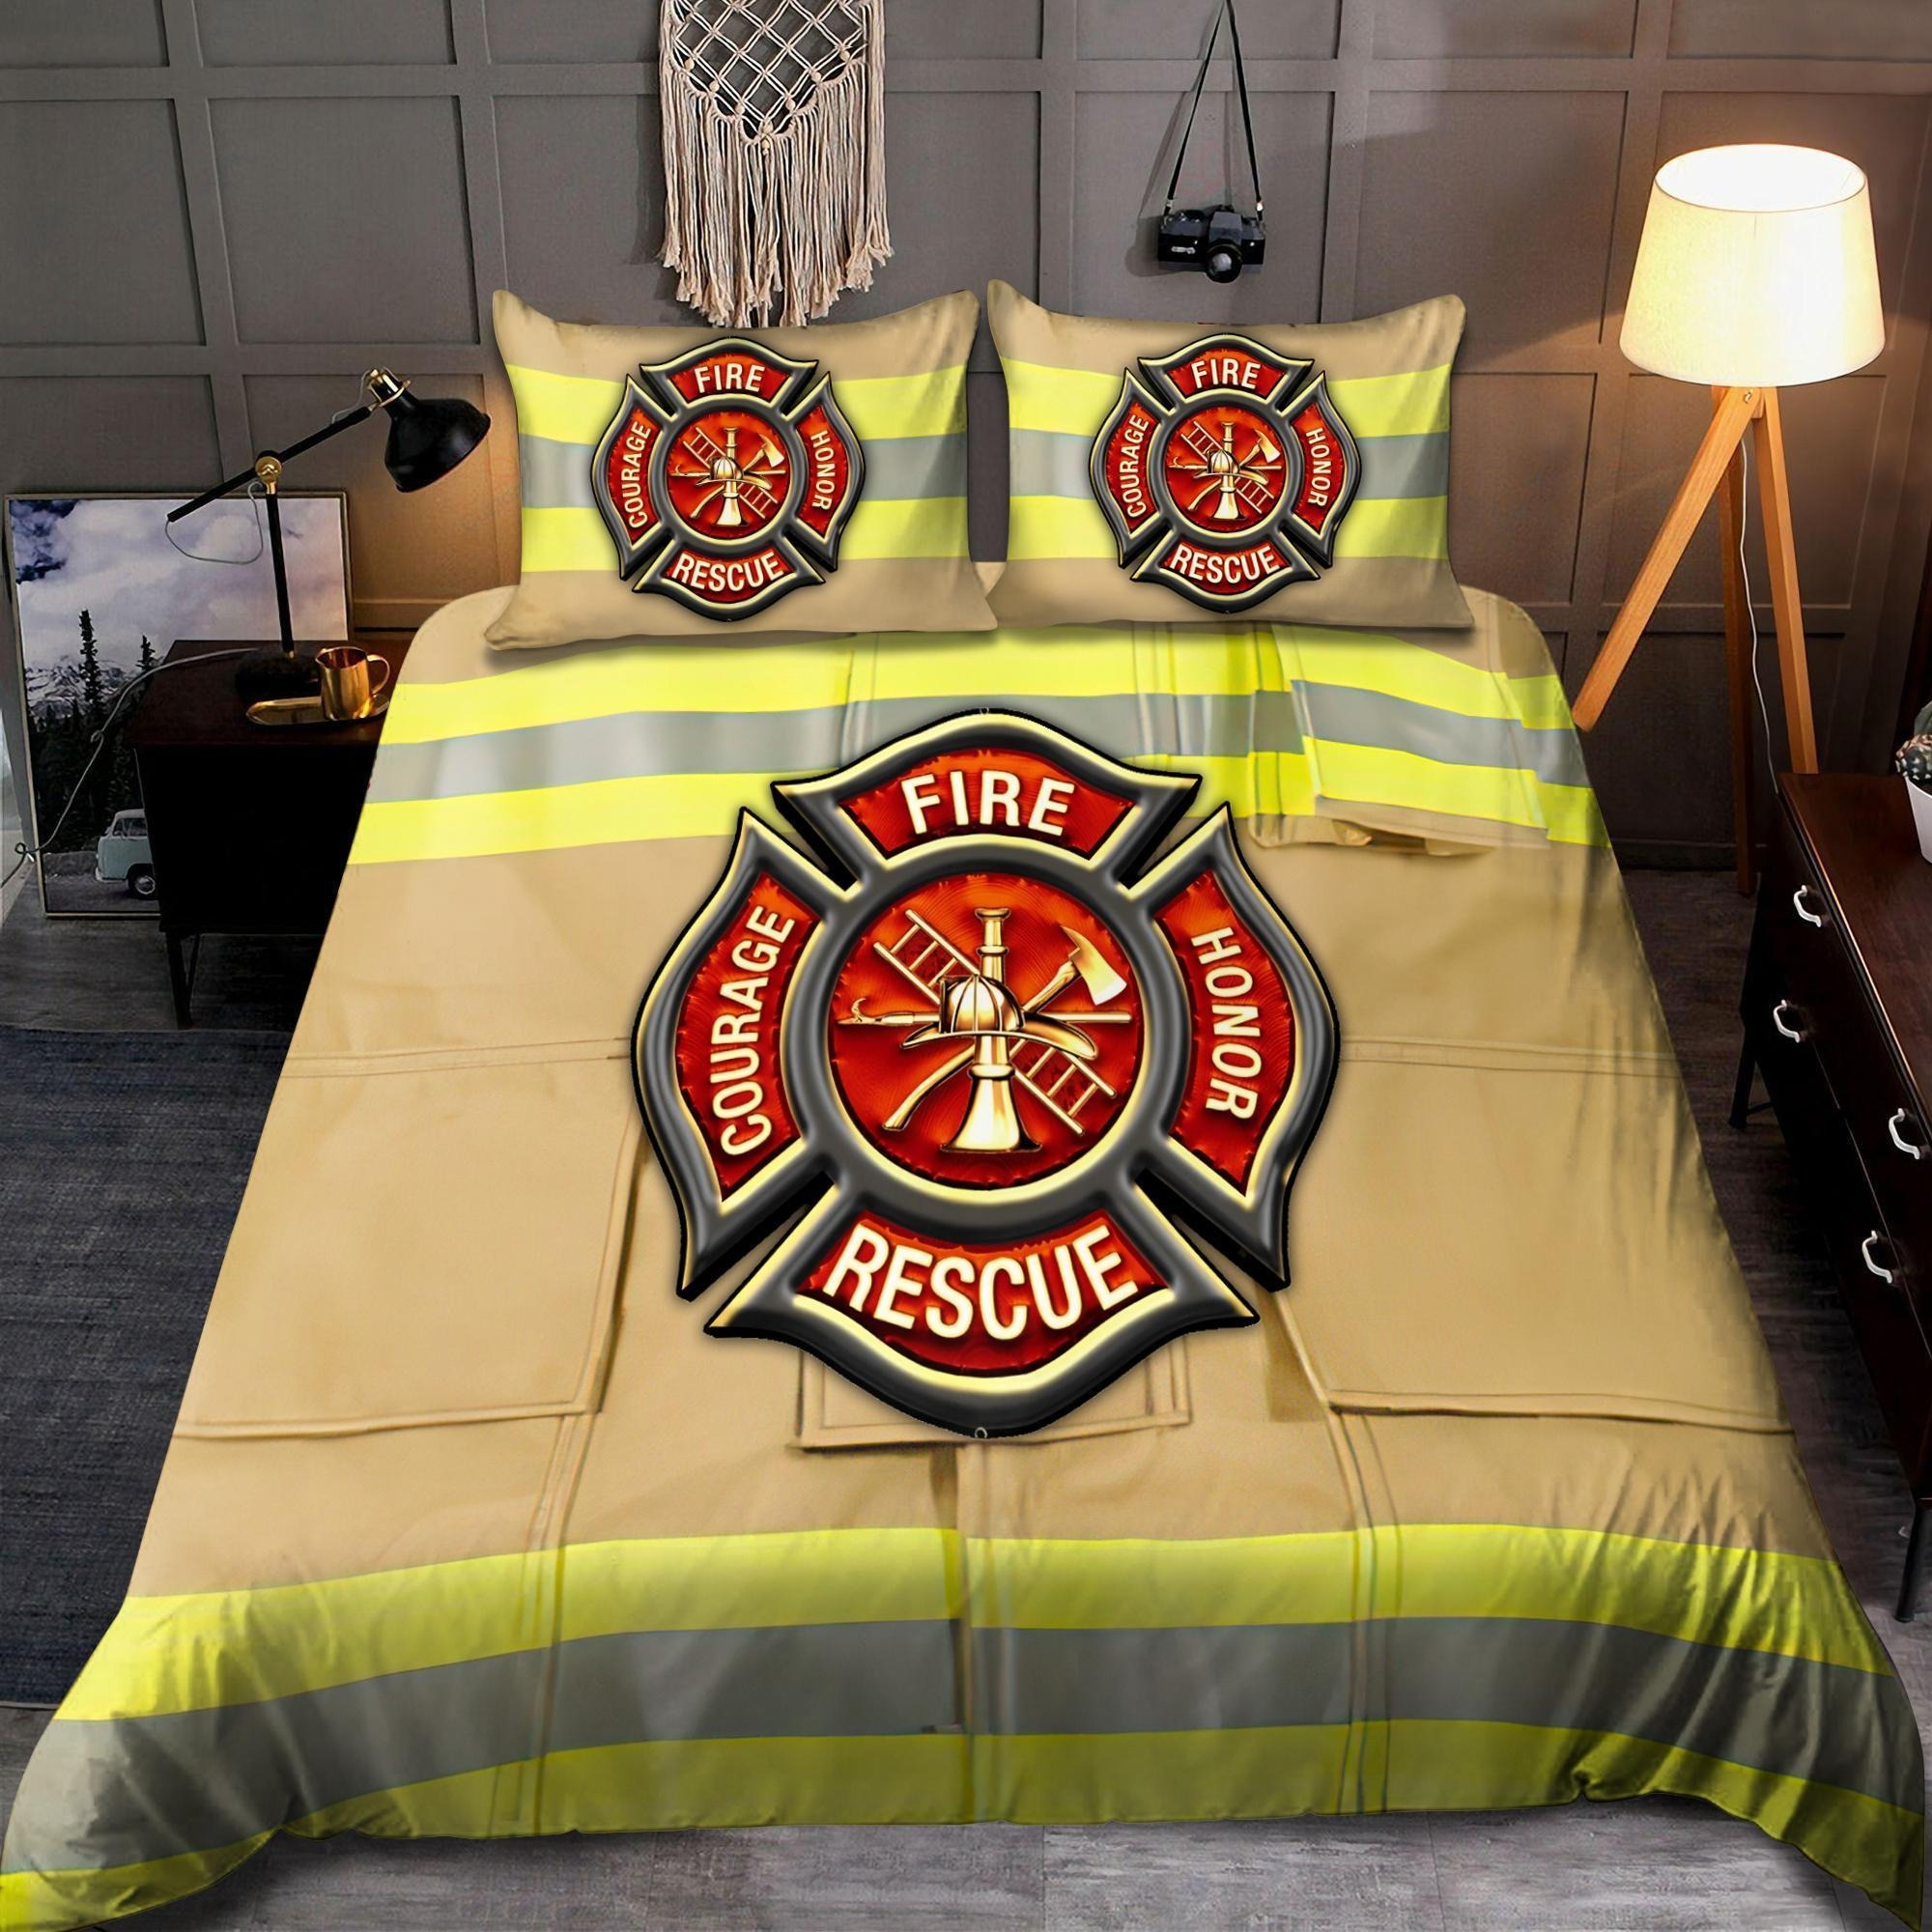 Firefighter Fire Honor Rescue Courage bedding set2